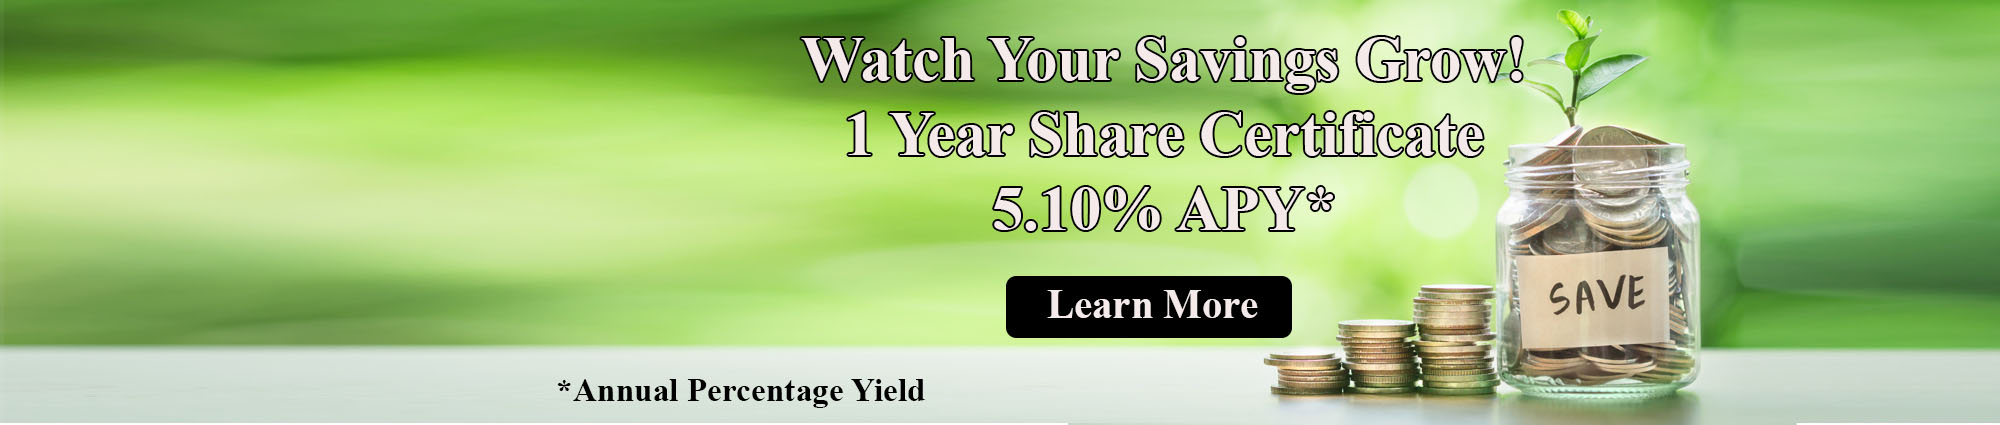 Watch Your Savings Grow! 1 Year Share Certificate five point ten percent annual percentage yield. Click to learn more.